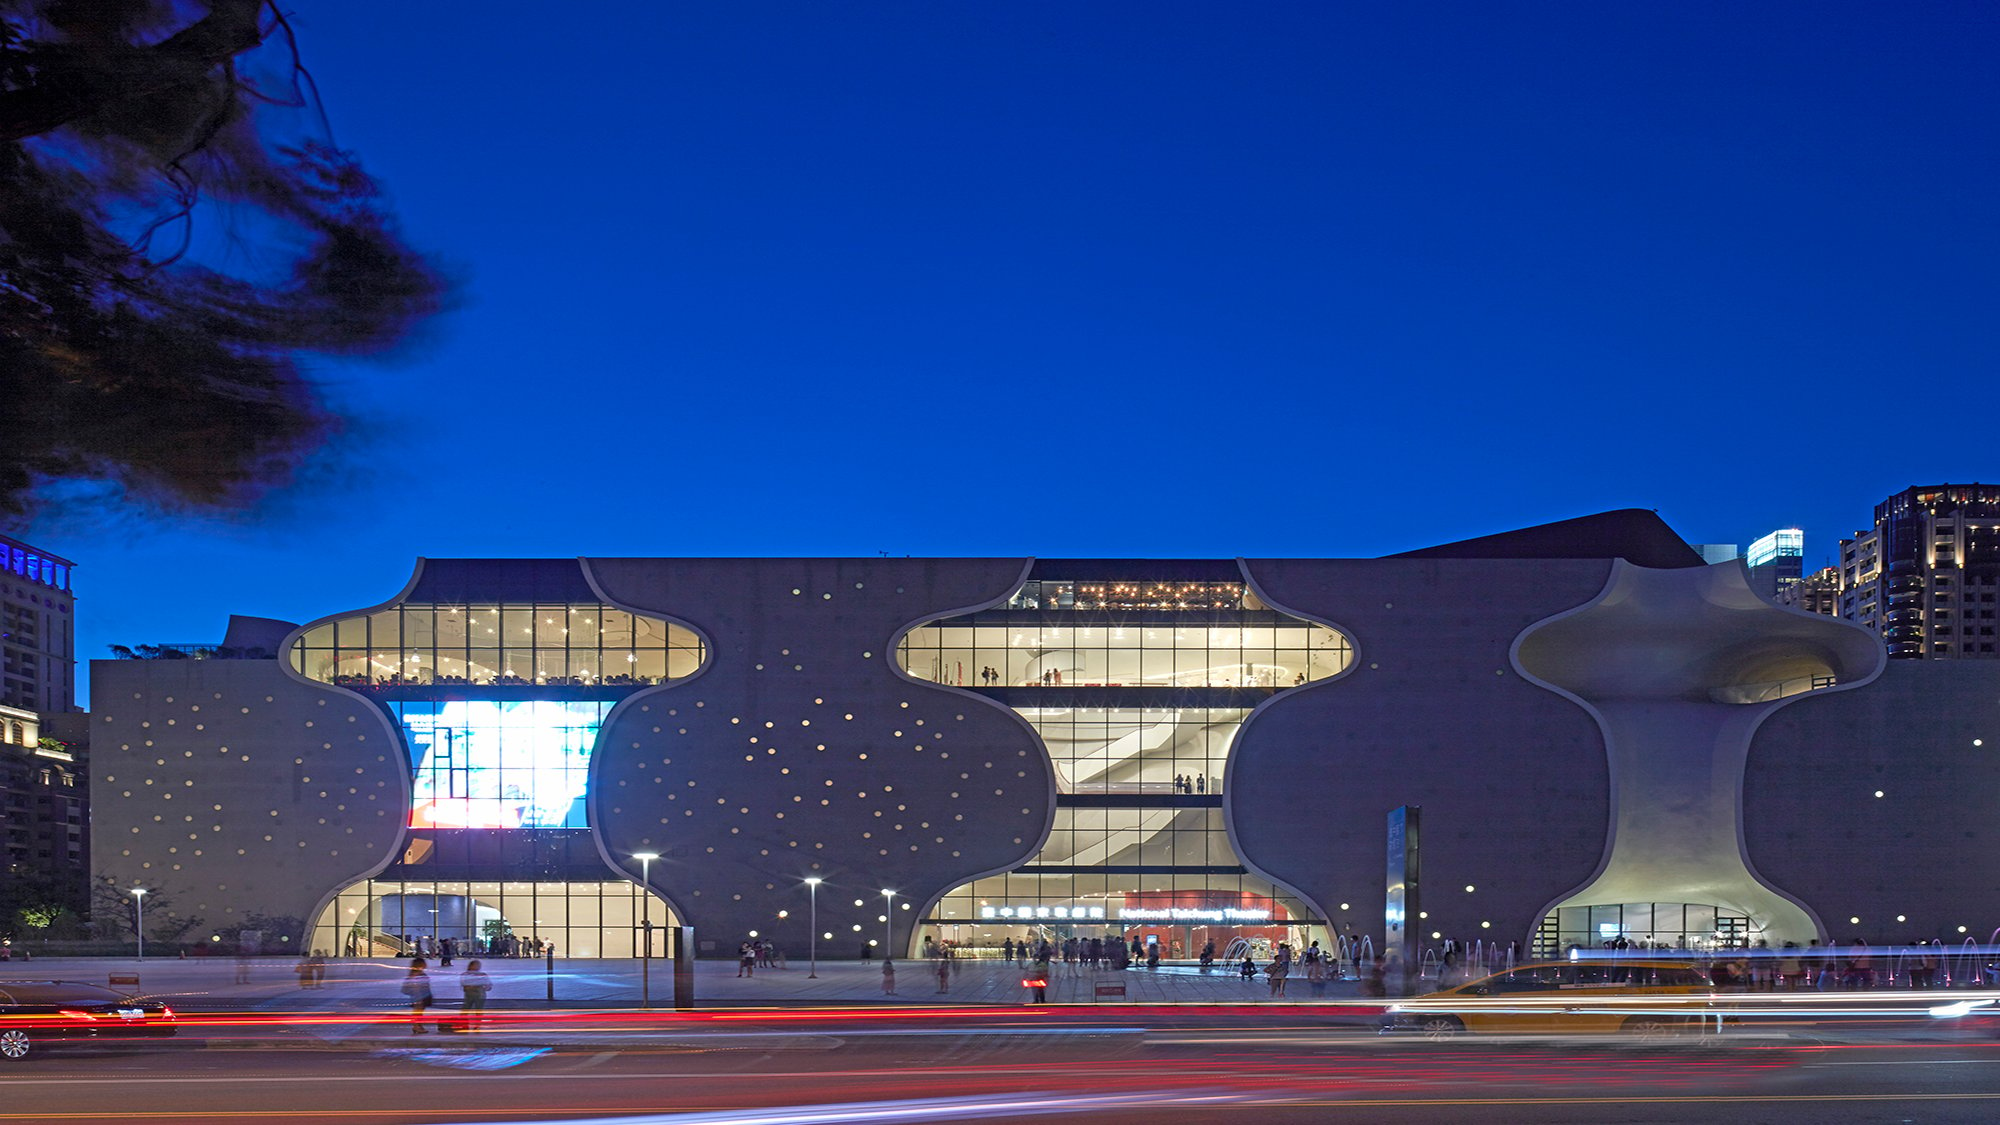 The National Taichung Theater is an opera house in the Taichung’s 7th Redevelopment Zone of Taichung, Taiwan